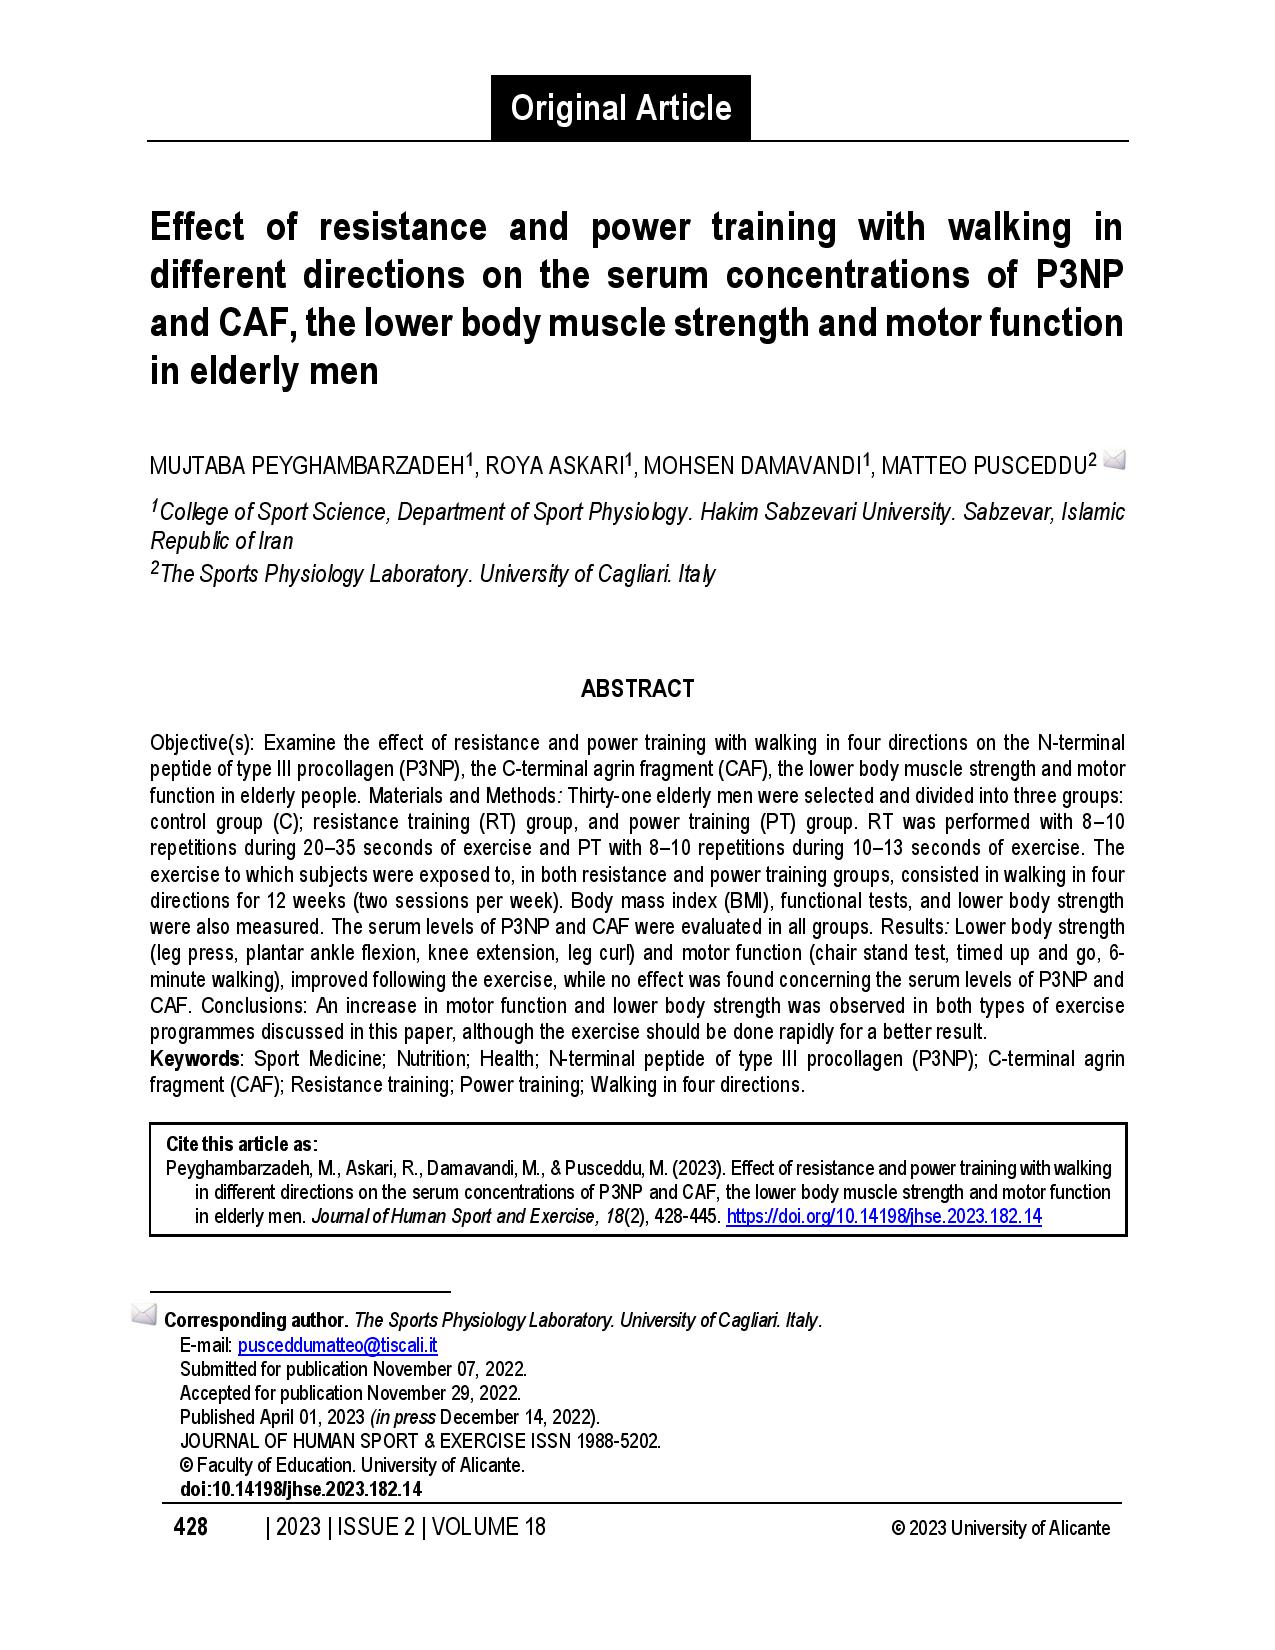 Effect of resistance and power training with walking in different directions on the serum concentrations of P3NP and CAF, the lower body muscle strength and motor function in elderly men